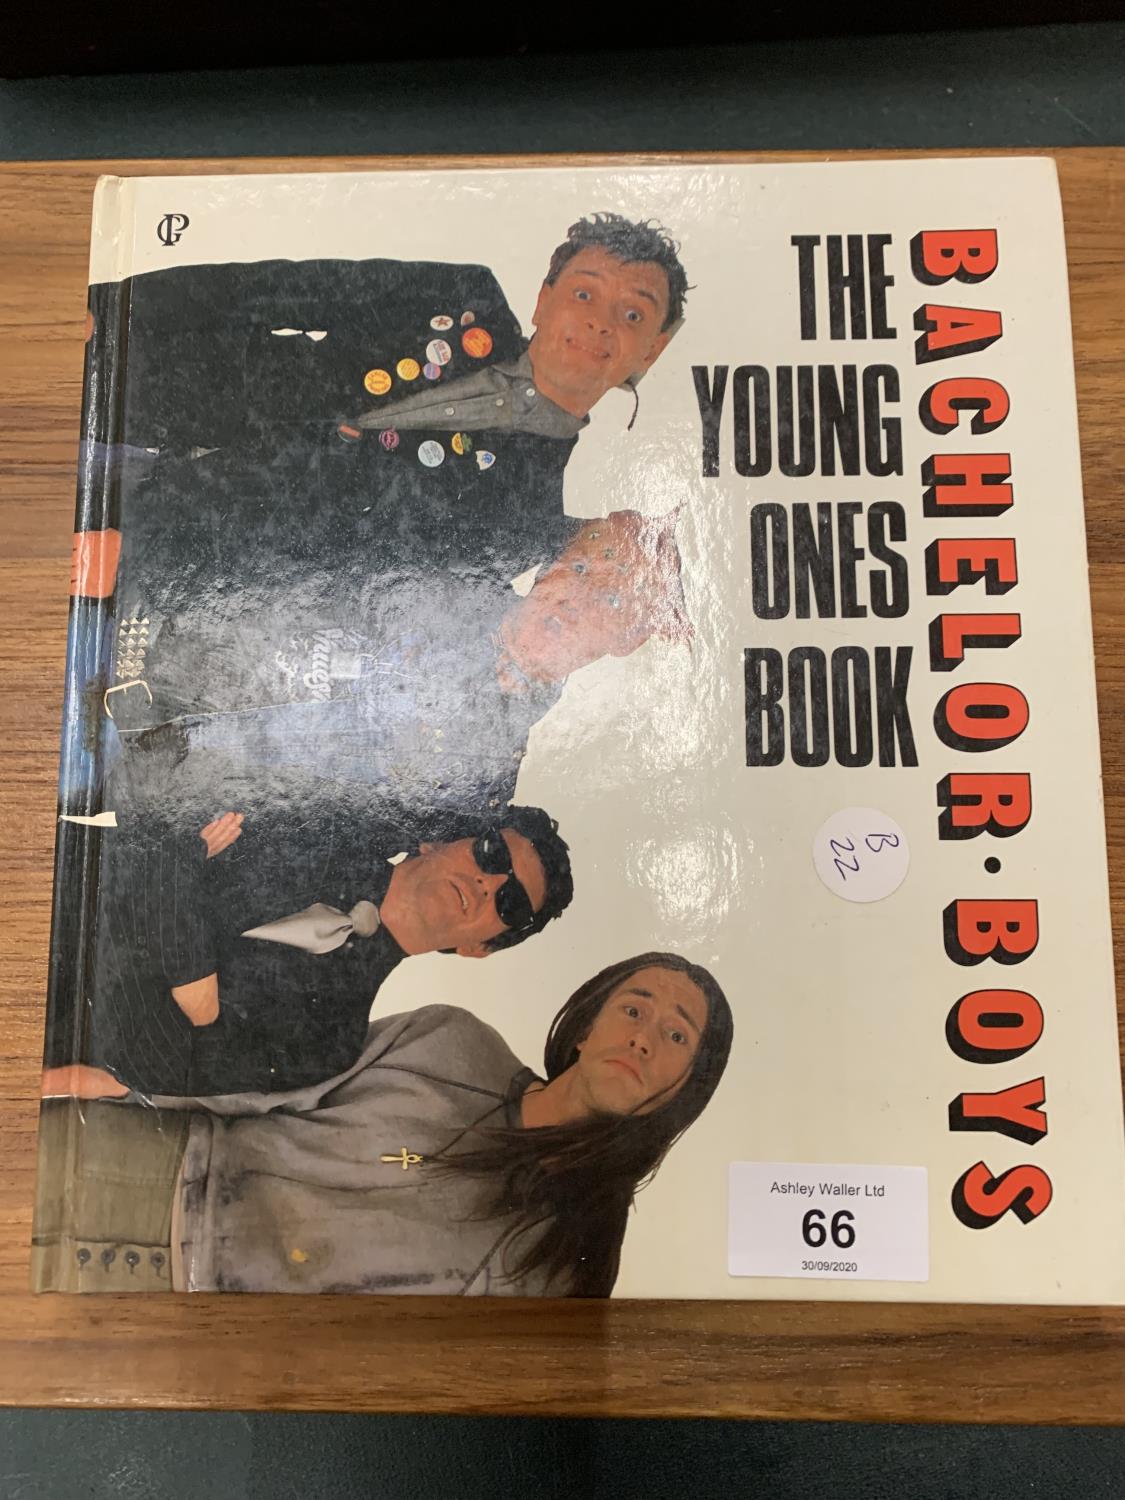 A HARD BACK COPY OF 'THE YOUNG ONES BOOK- BACHELOR BOYS' SIGNATURE IS A PRINT